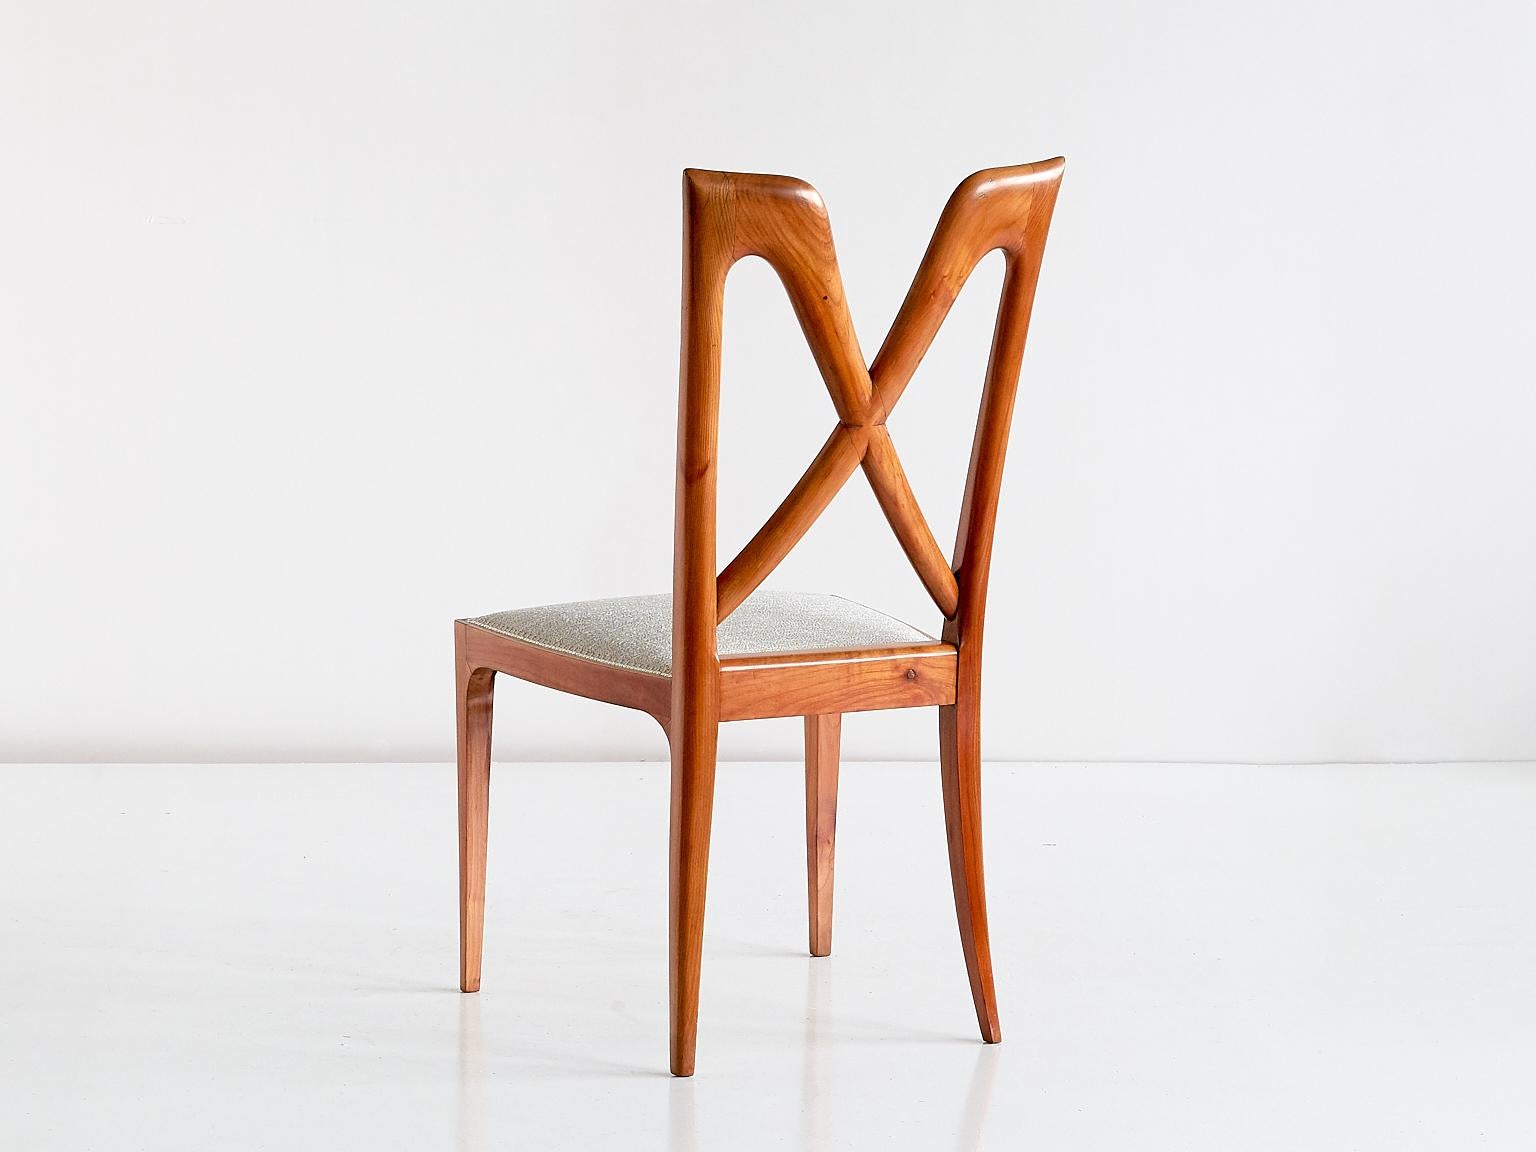 Set of Six Ulderico Carlo Forni Dining Chairs in Cherry Wood, Italy, 1940s For Sale 3